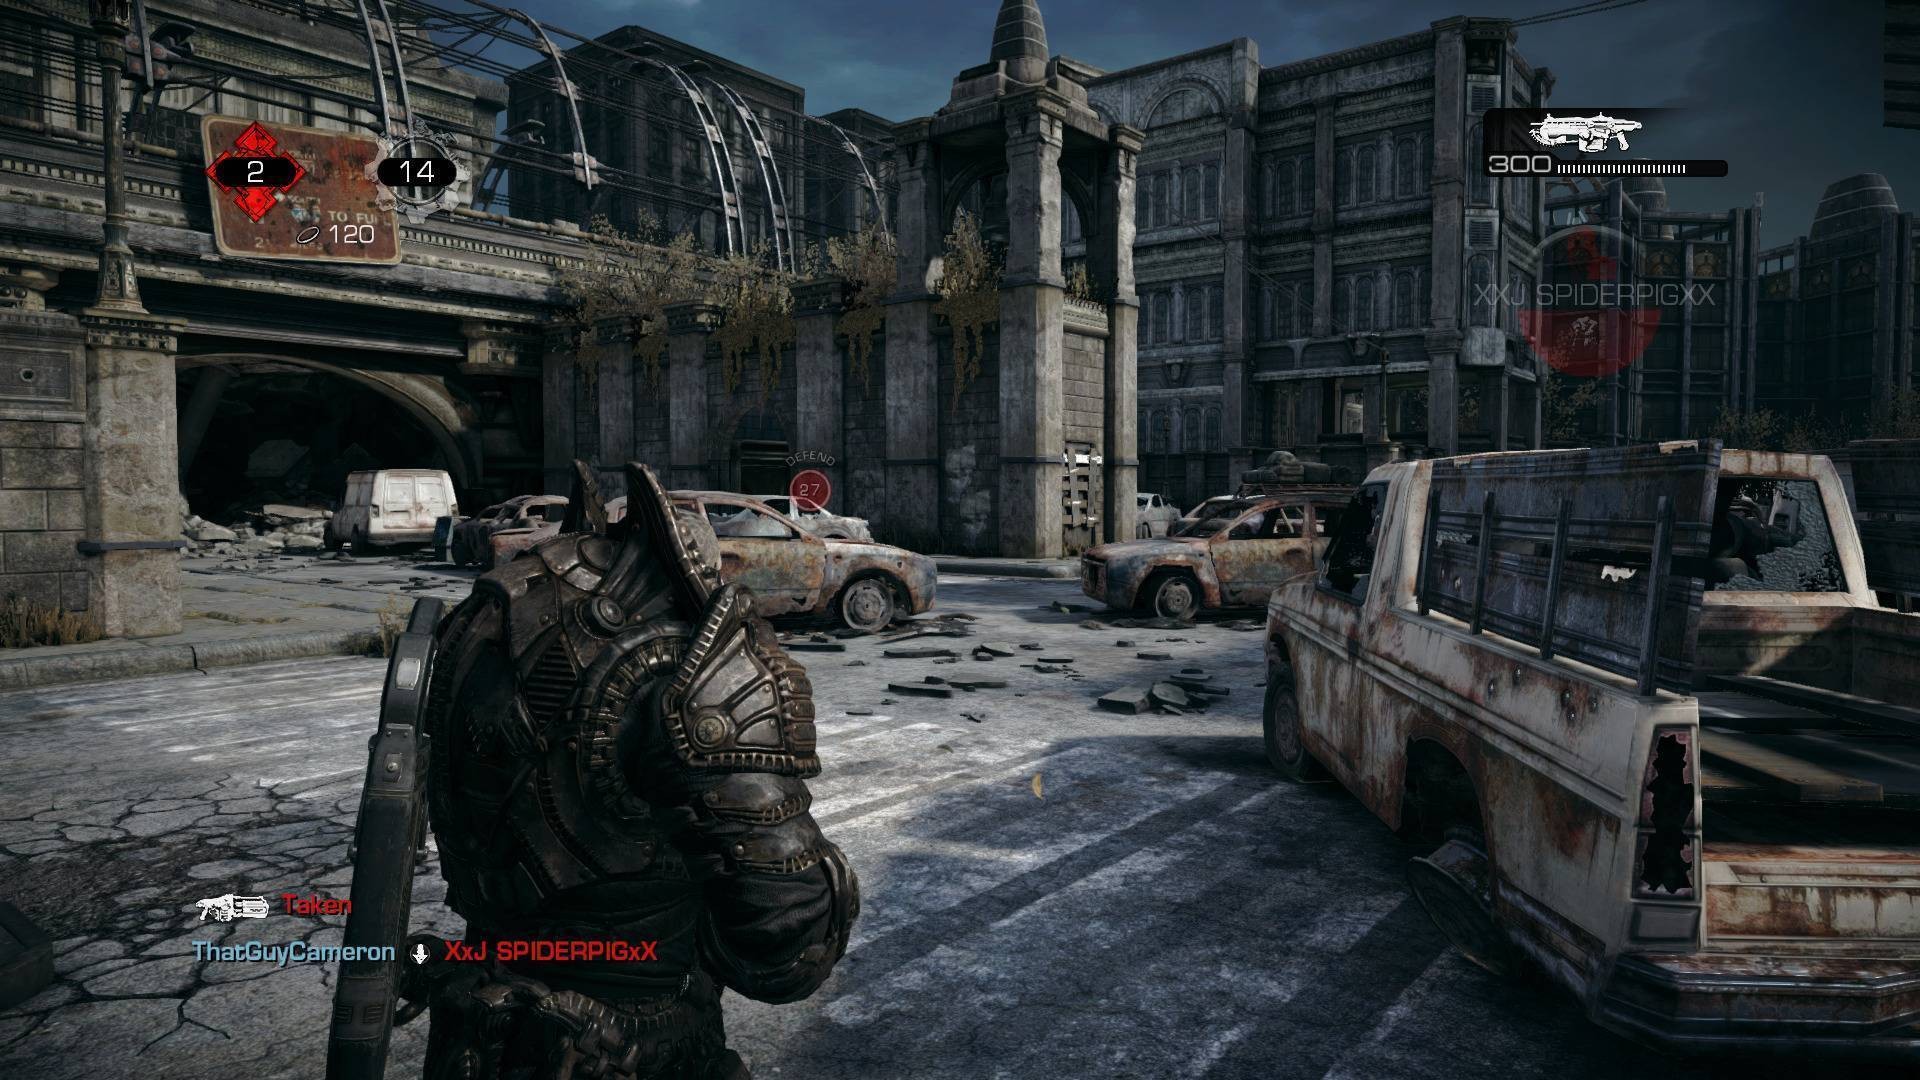 Gears of War: Ultimate Edition PC System Requirements